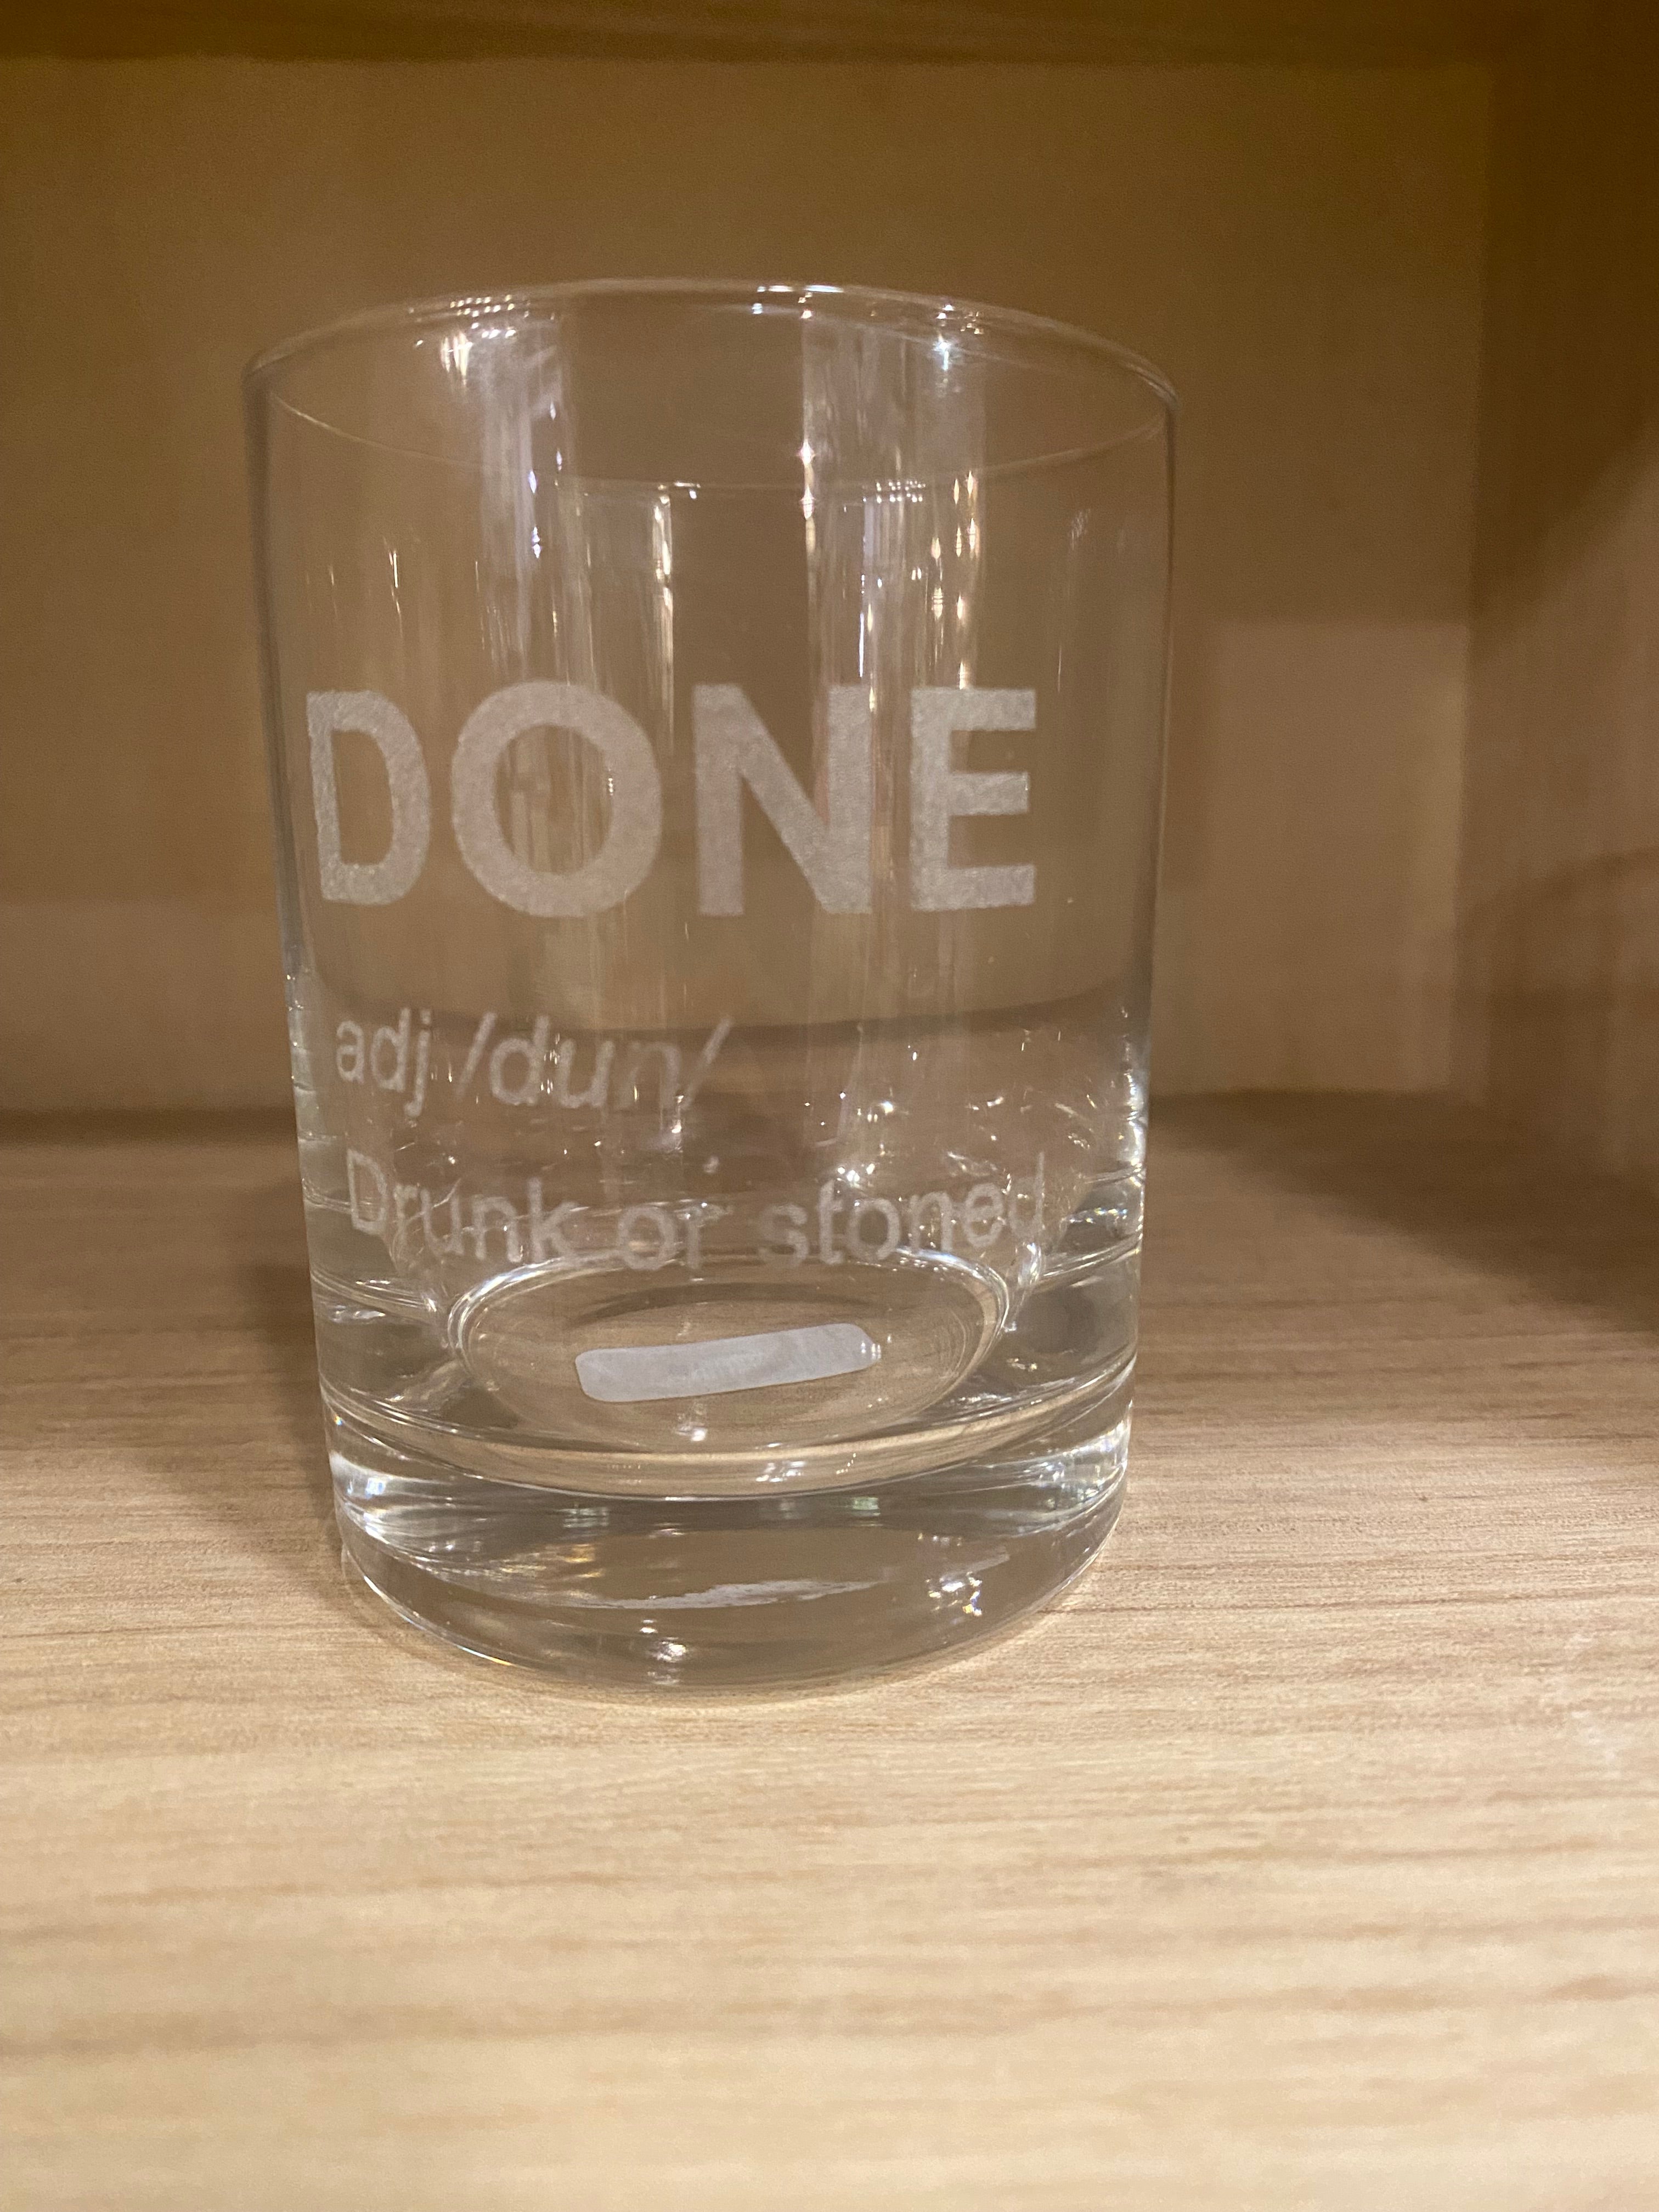 Done/Drunk or Stoned Glass